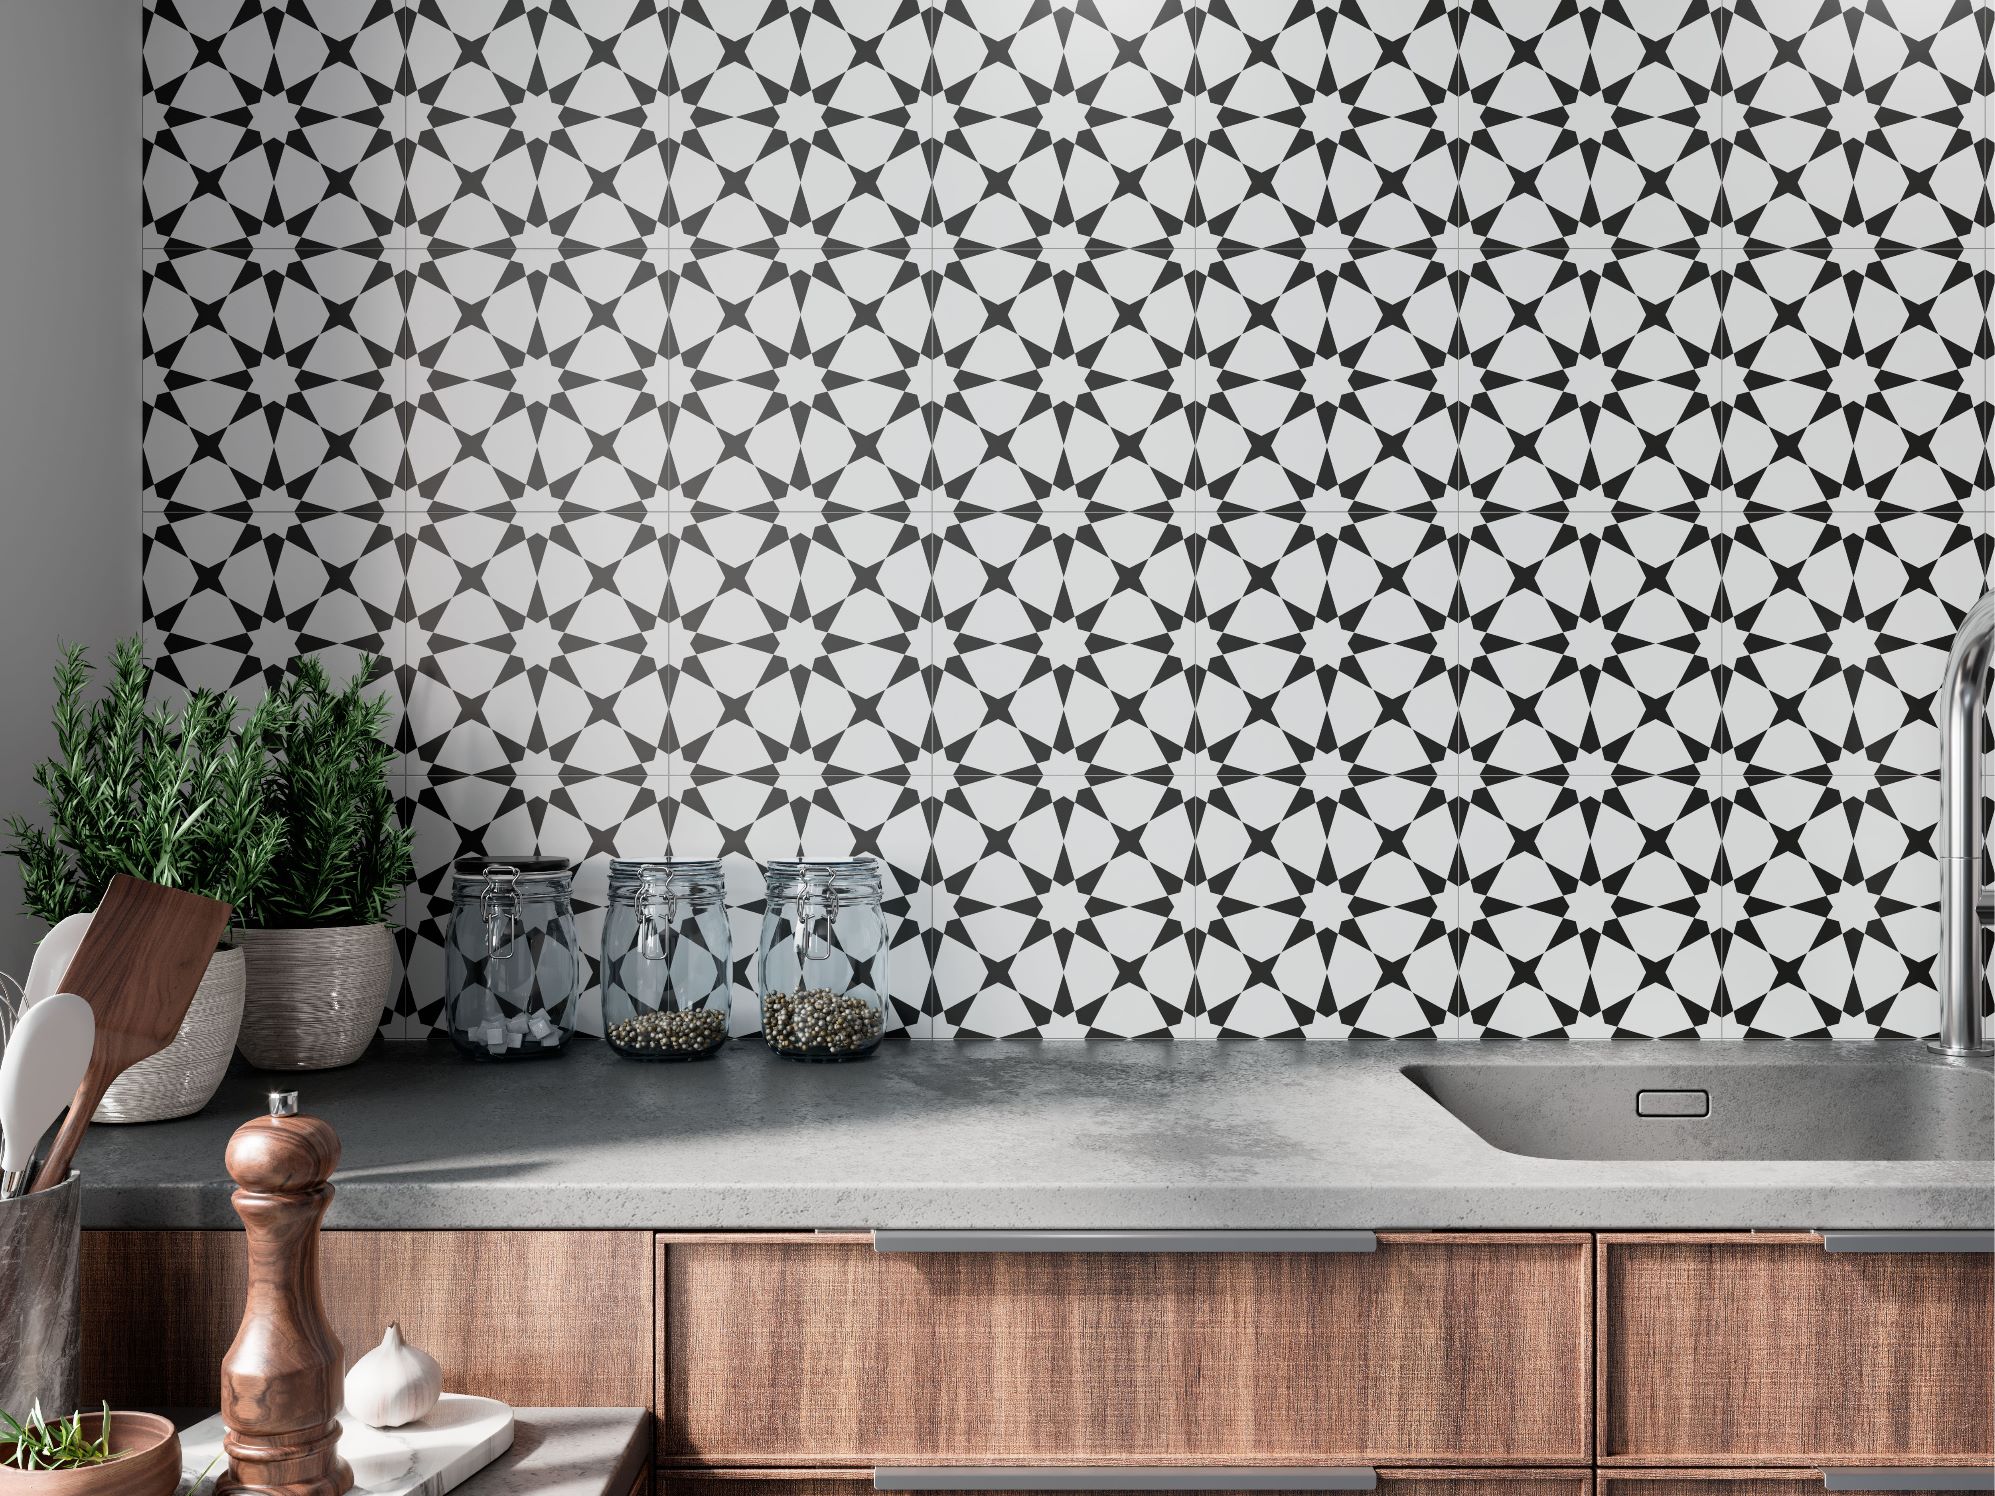 Dorian Antracita Star | Stones & More | Finest selection of Mosaics, Glass, Tile and Stone